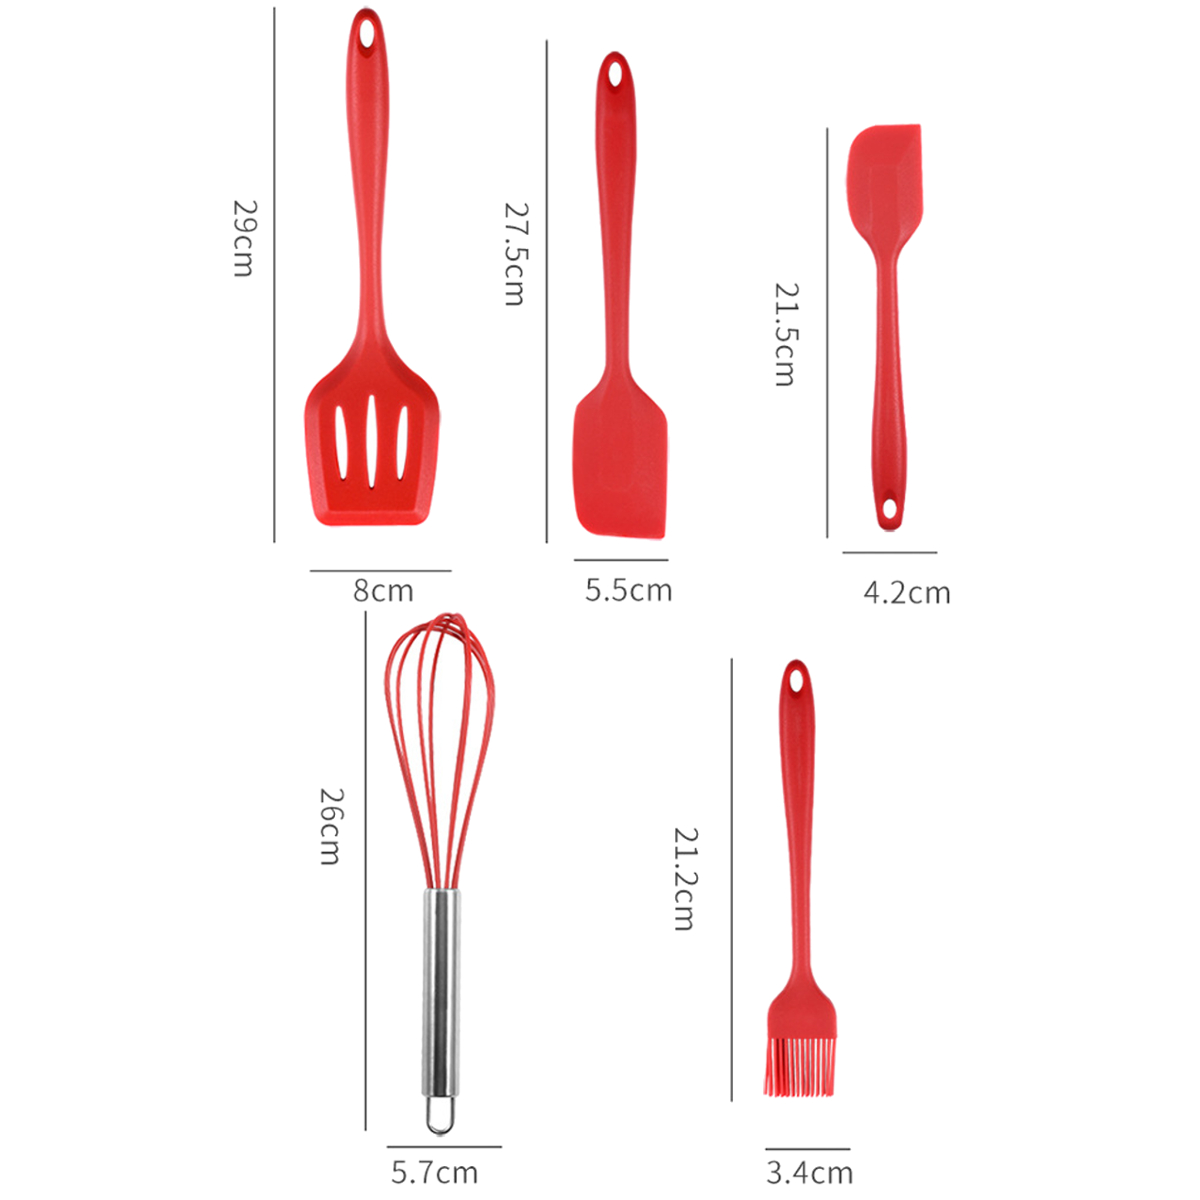 Silicone Cooking Utensils Wooden Handle Kitchen Set Cooking Tools Sets Accessories with Stainless Steel Storage Box